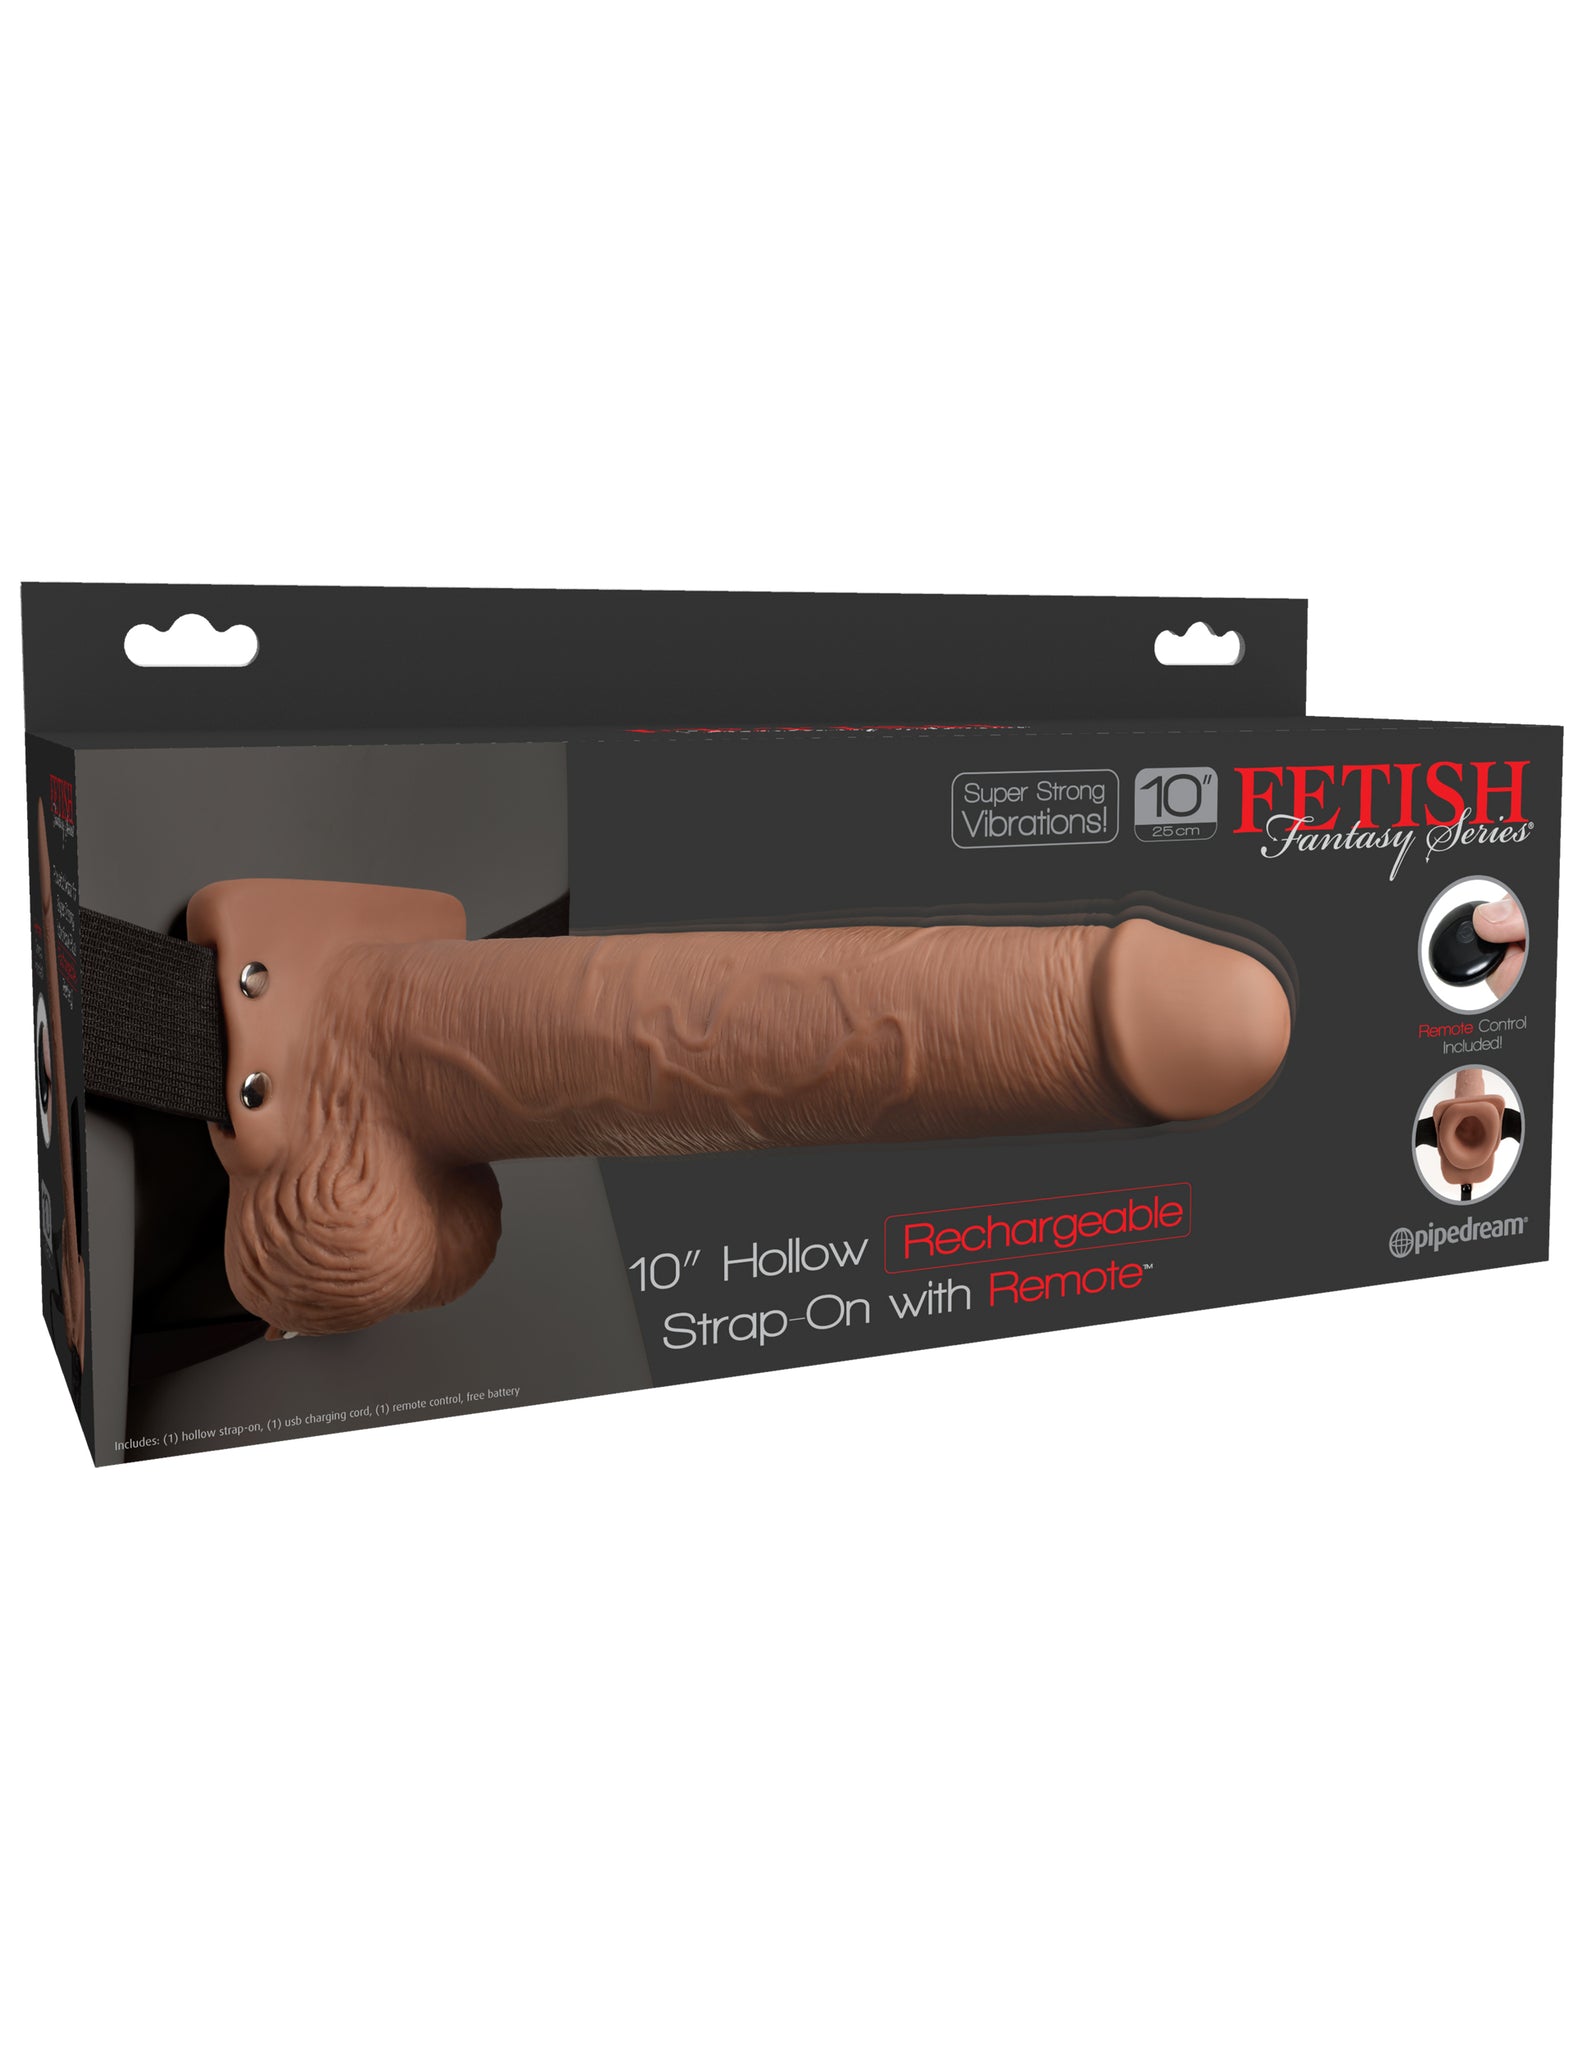 Fetish Fantasy Series 10 Hollow Rechargeable Strap-on With Remote - Tan PD3396-22